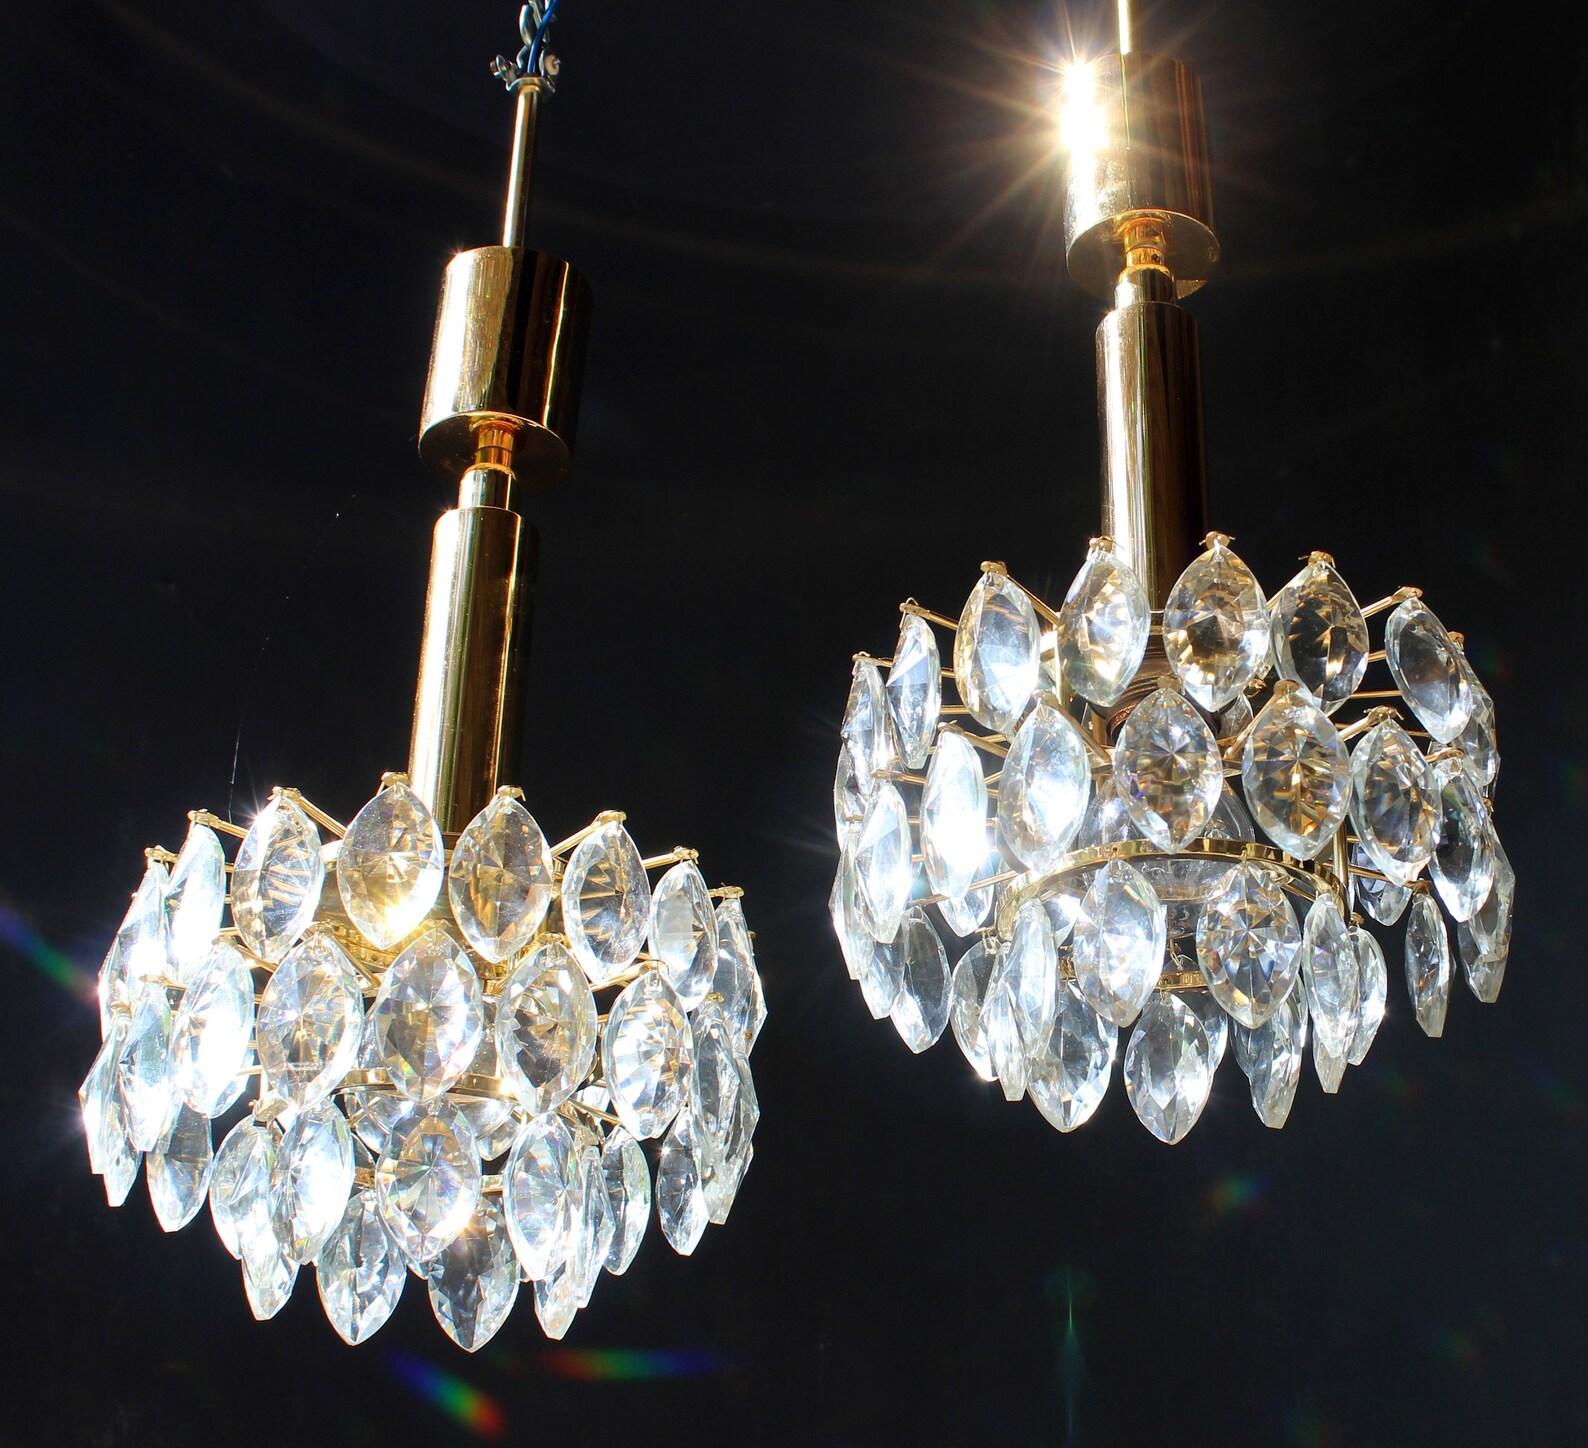 Pair of elegant 1 light (e27) gilt brass & fine lead crystal chandeliers 1970´s / Schröder Leuchten / Germany

Each 1 light & 45 grand crystal drops

Measures: Diameter 9 inches height of the body 6 inches original height 24 inches

These fine